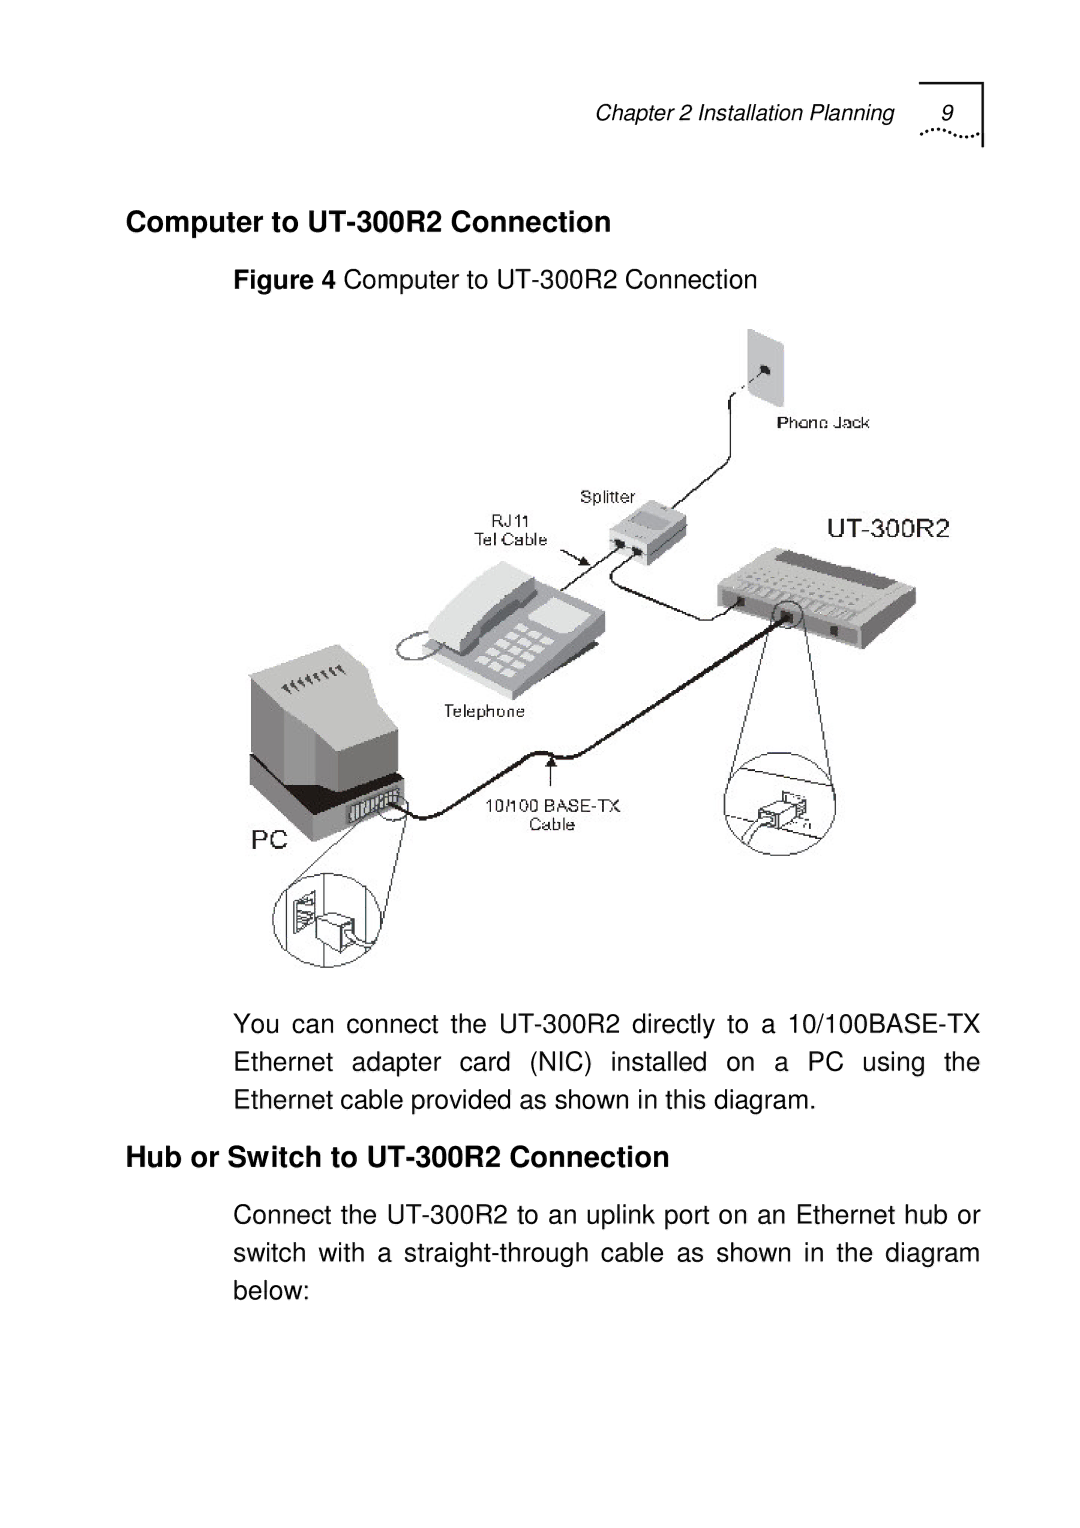 UTStarcom manual Computer to UT-300R2 Connection, Hub or Switch to UT-300R2 Connection 